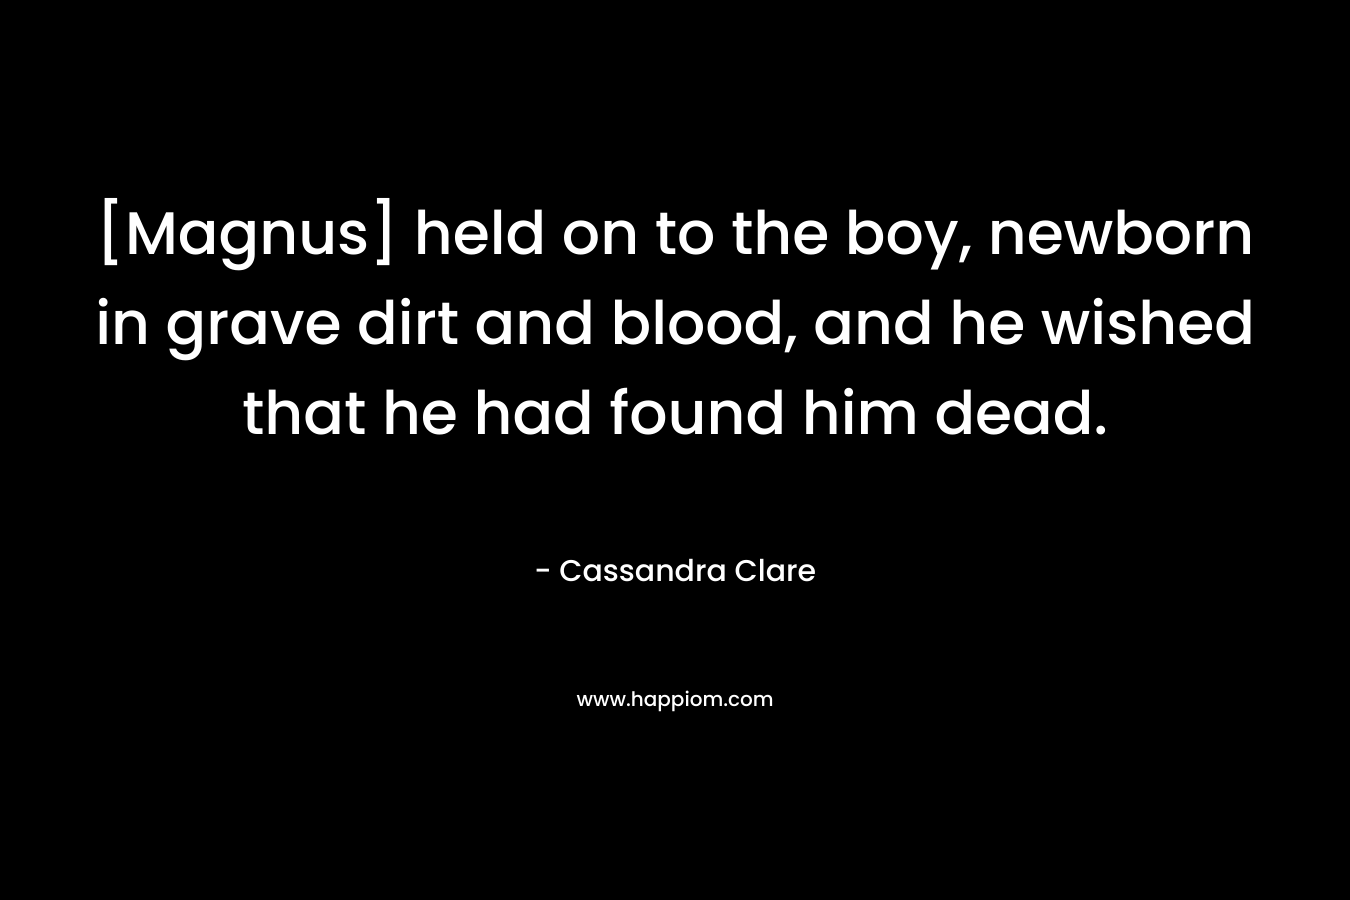 [Magnus] held on to the boy, newborn in grave dirt and blood, and he wished that he had found him dead. – Cassandra Clare